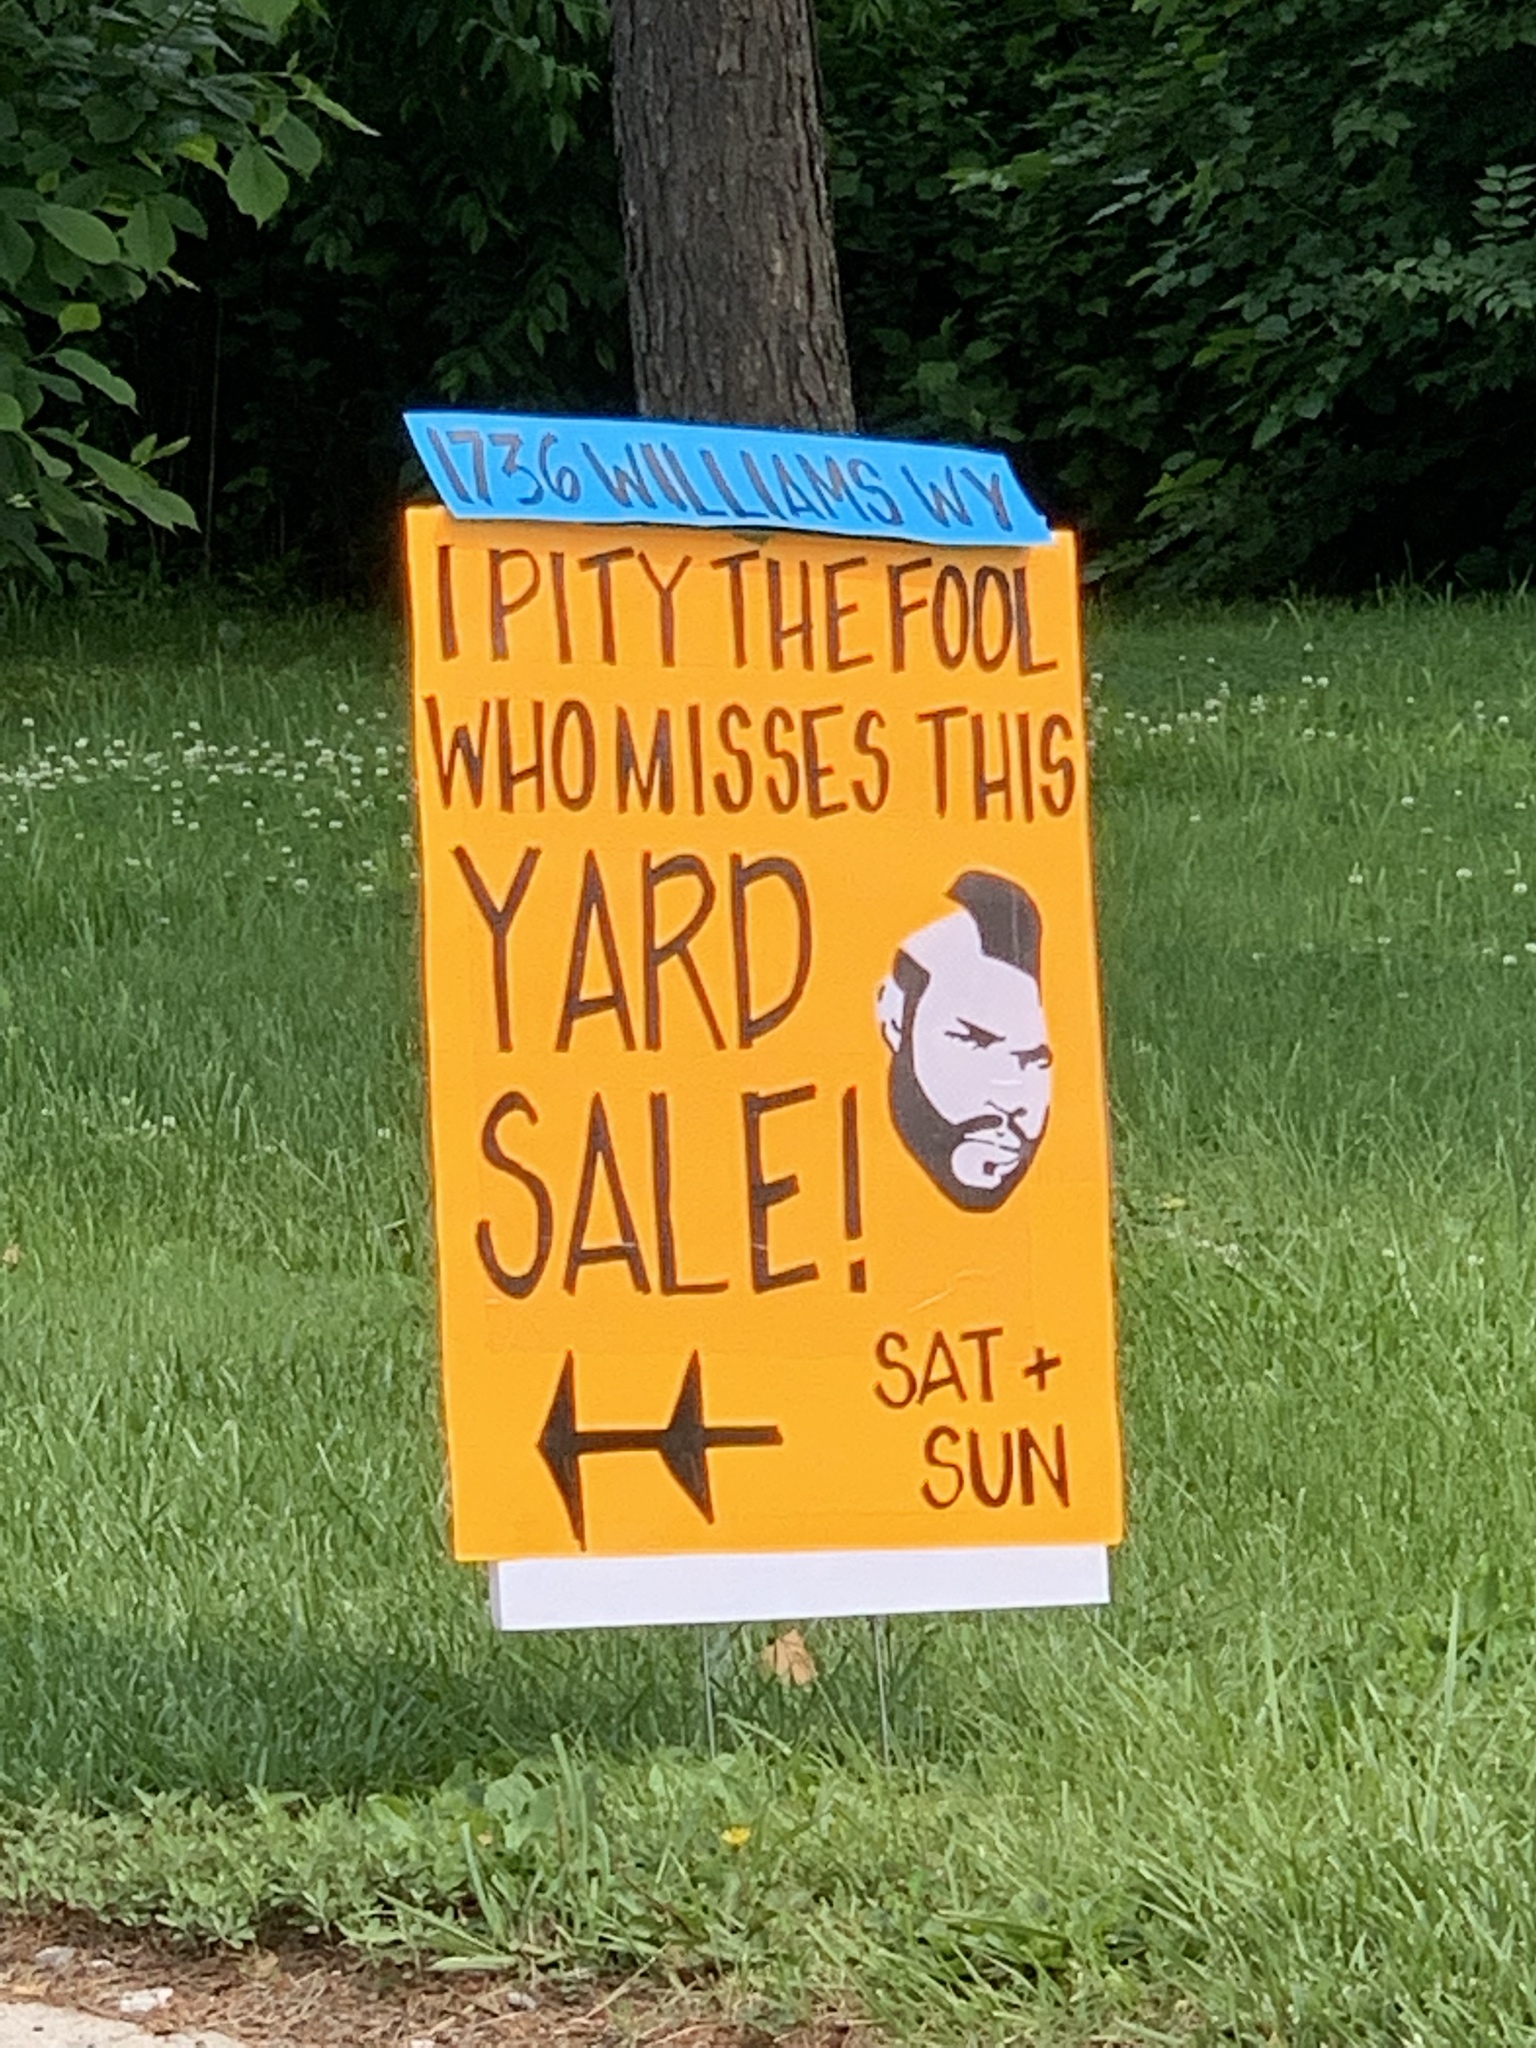 grass - 1136 Walansw I Pity The Foo Whomisses This Yard Sale Sat Sun